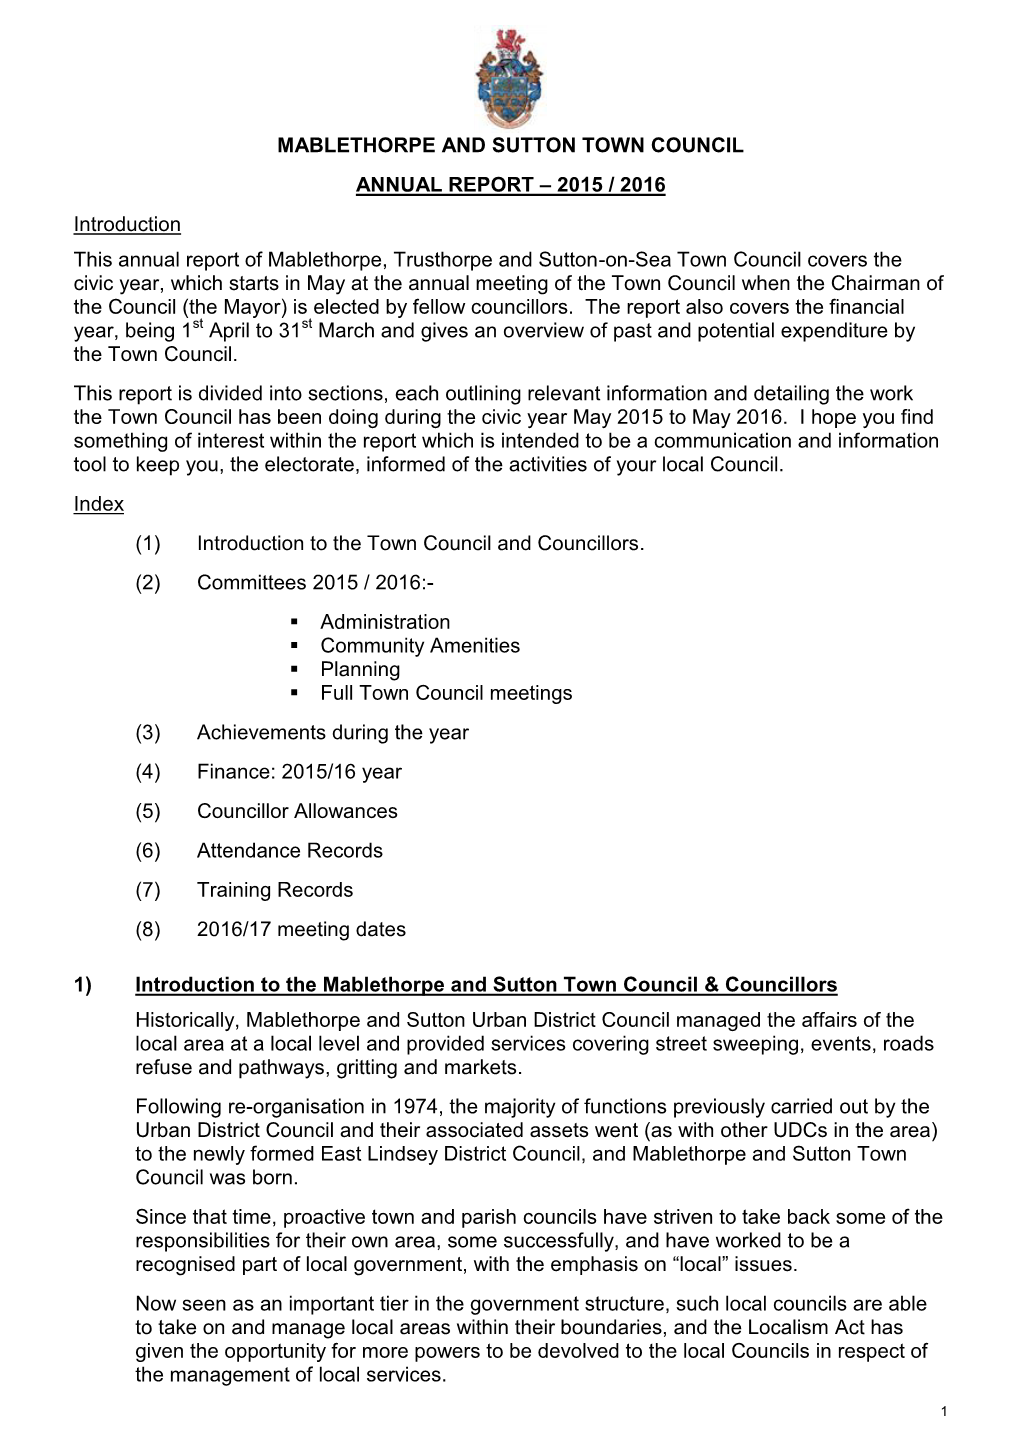 Mablethorpe and Sutton Town Council